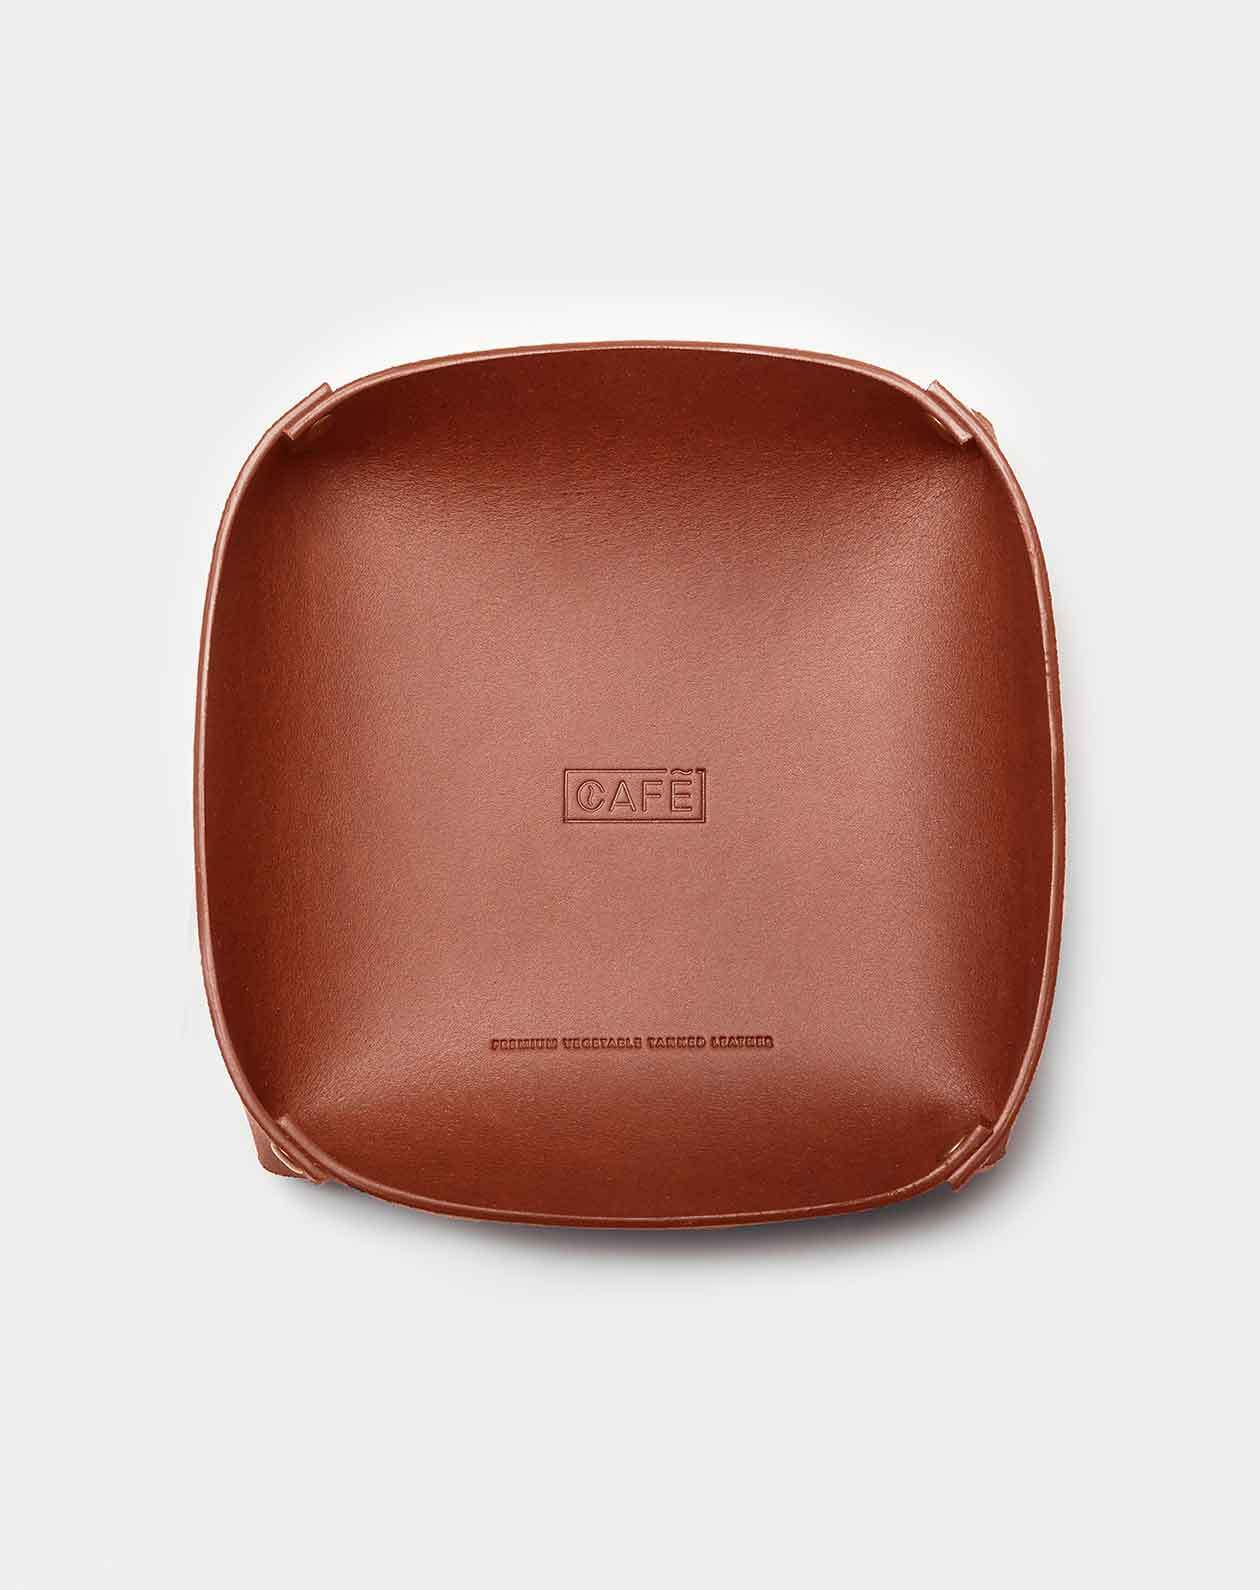 Leather Valet Tray Brown Vegetable, Brown Leather Tray